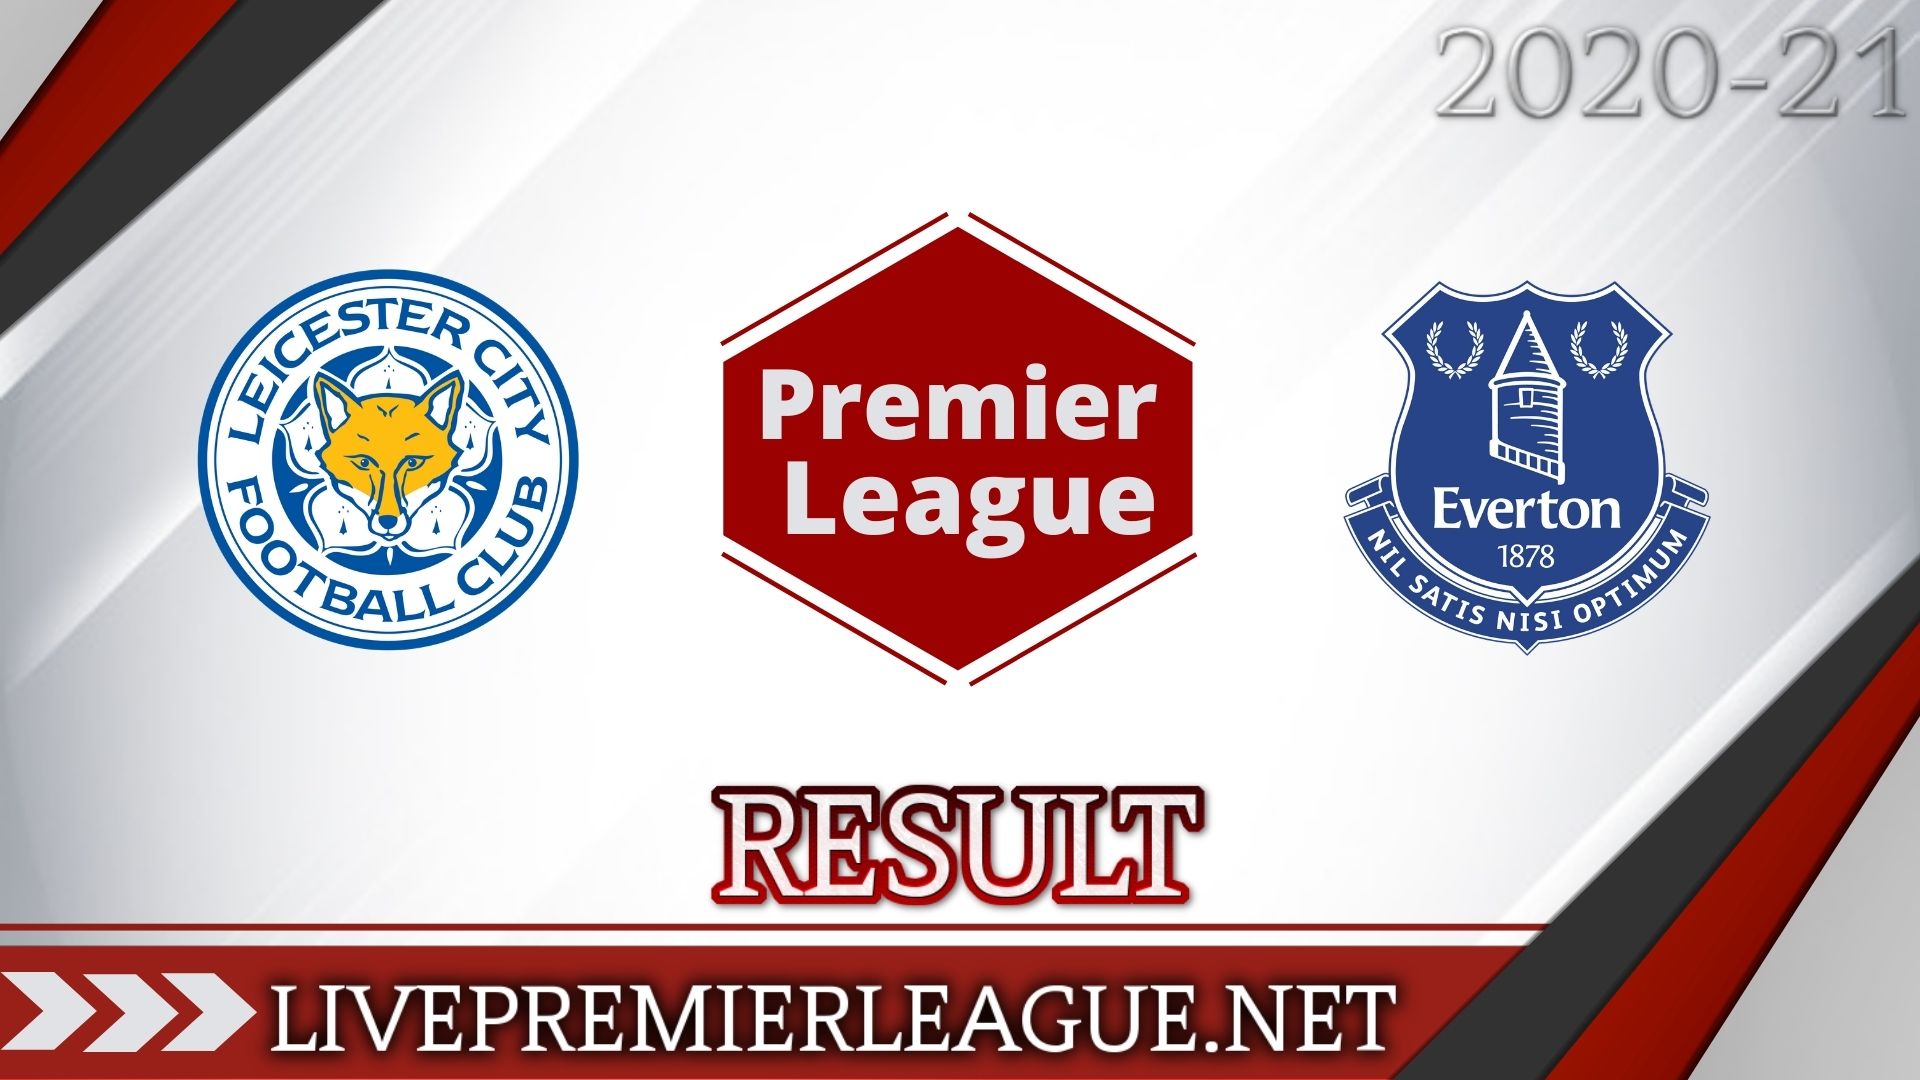 Leicester City Vs Everton | Week 13 Result 2020